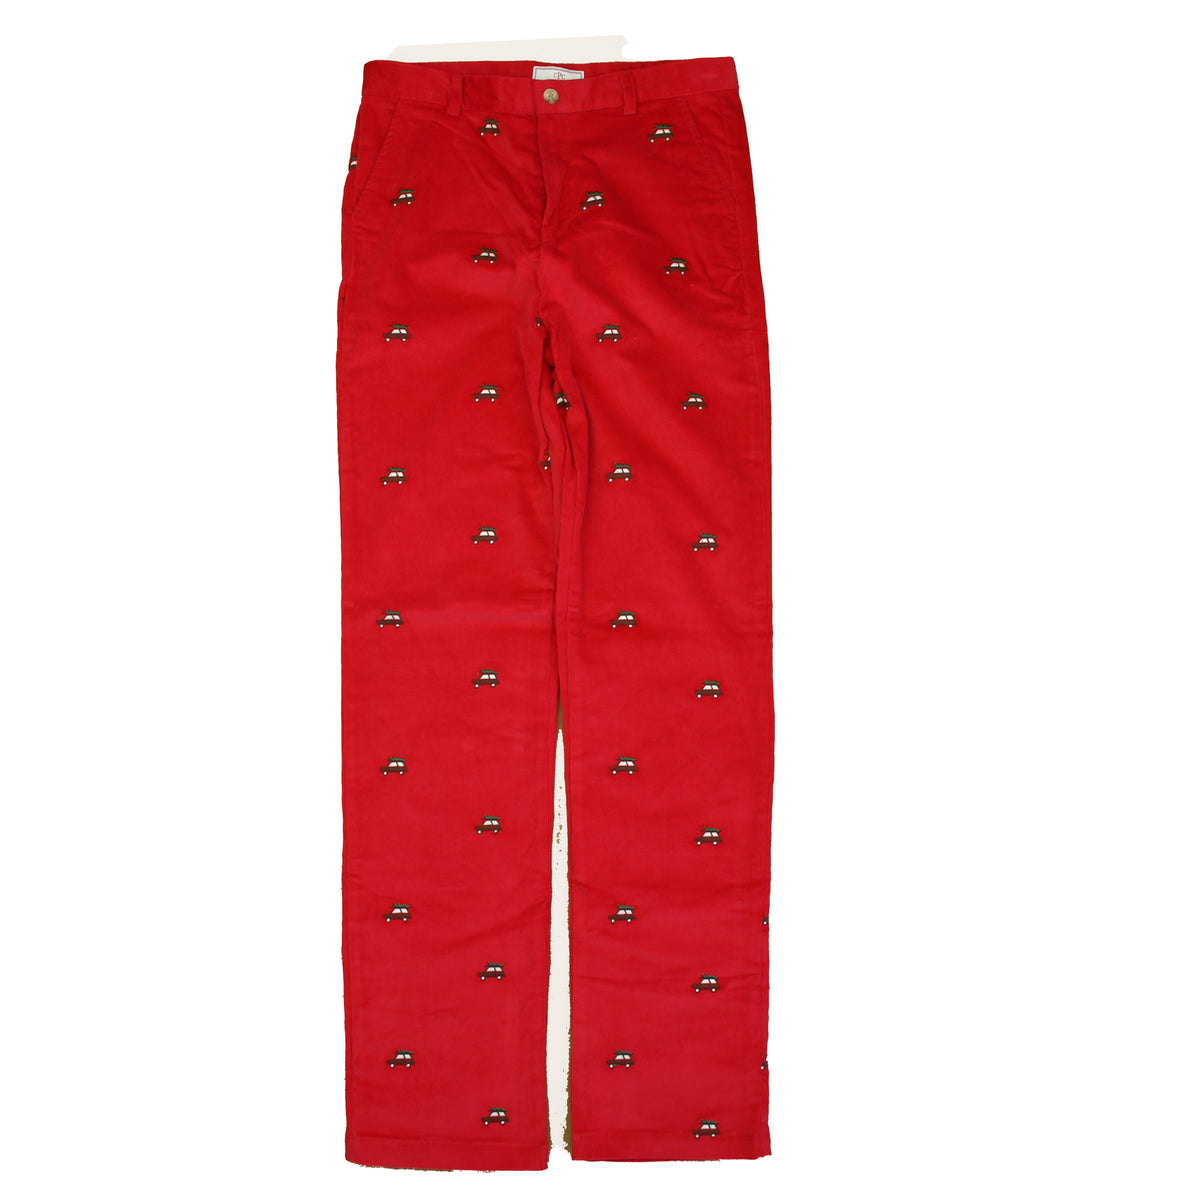 New with Tags: Crimson w/ Woody Embroidery Pants size: 6-14 Years -- FINAL SALE